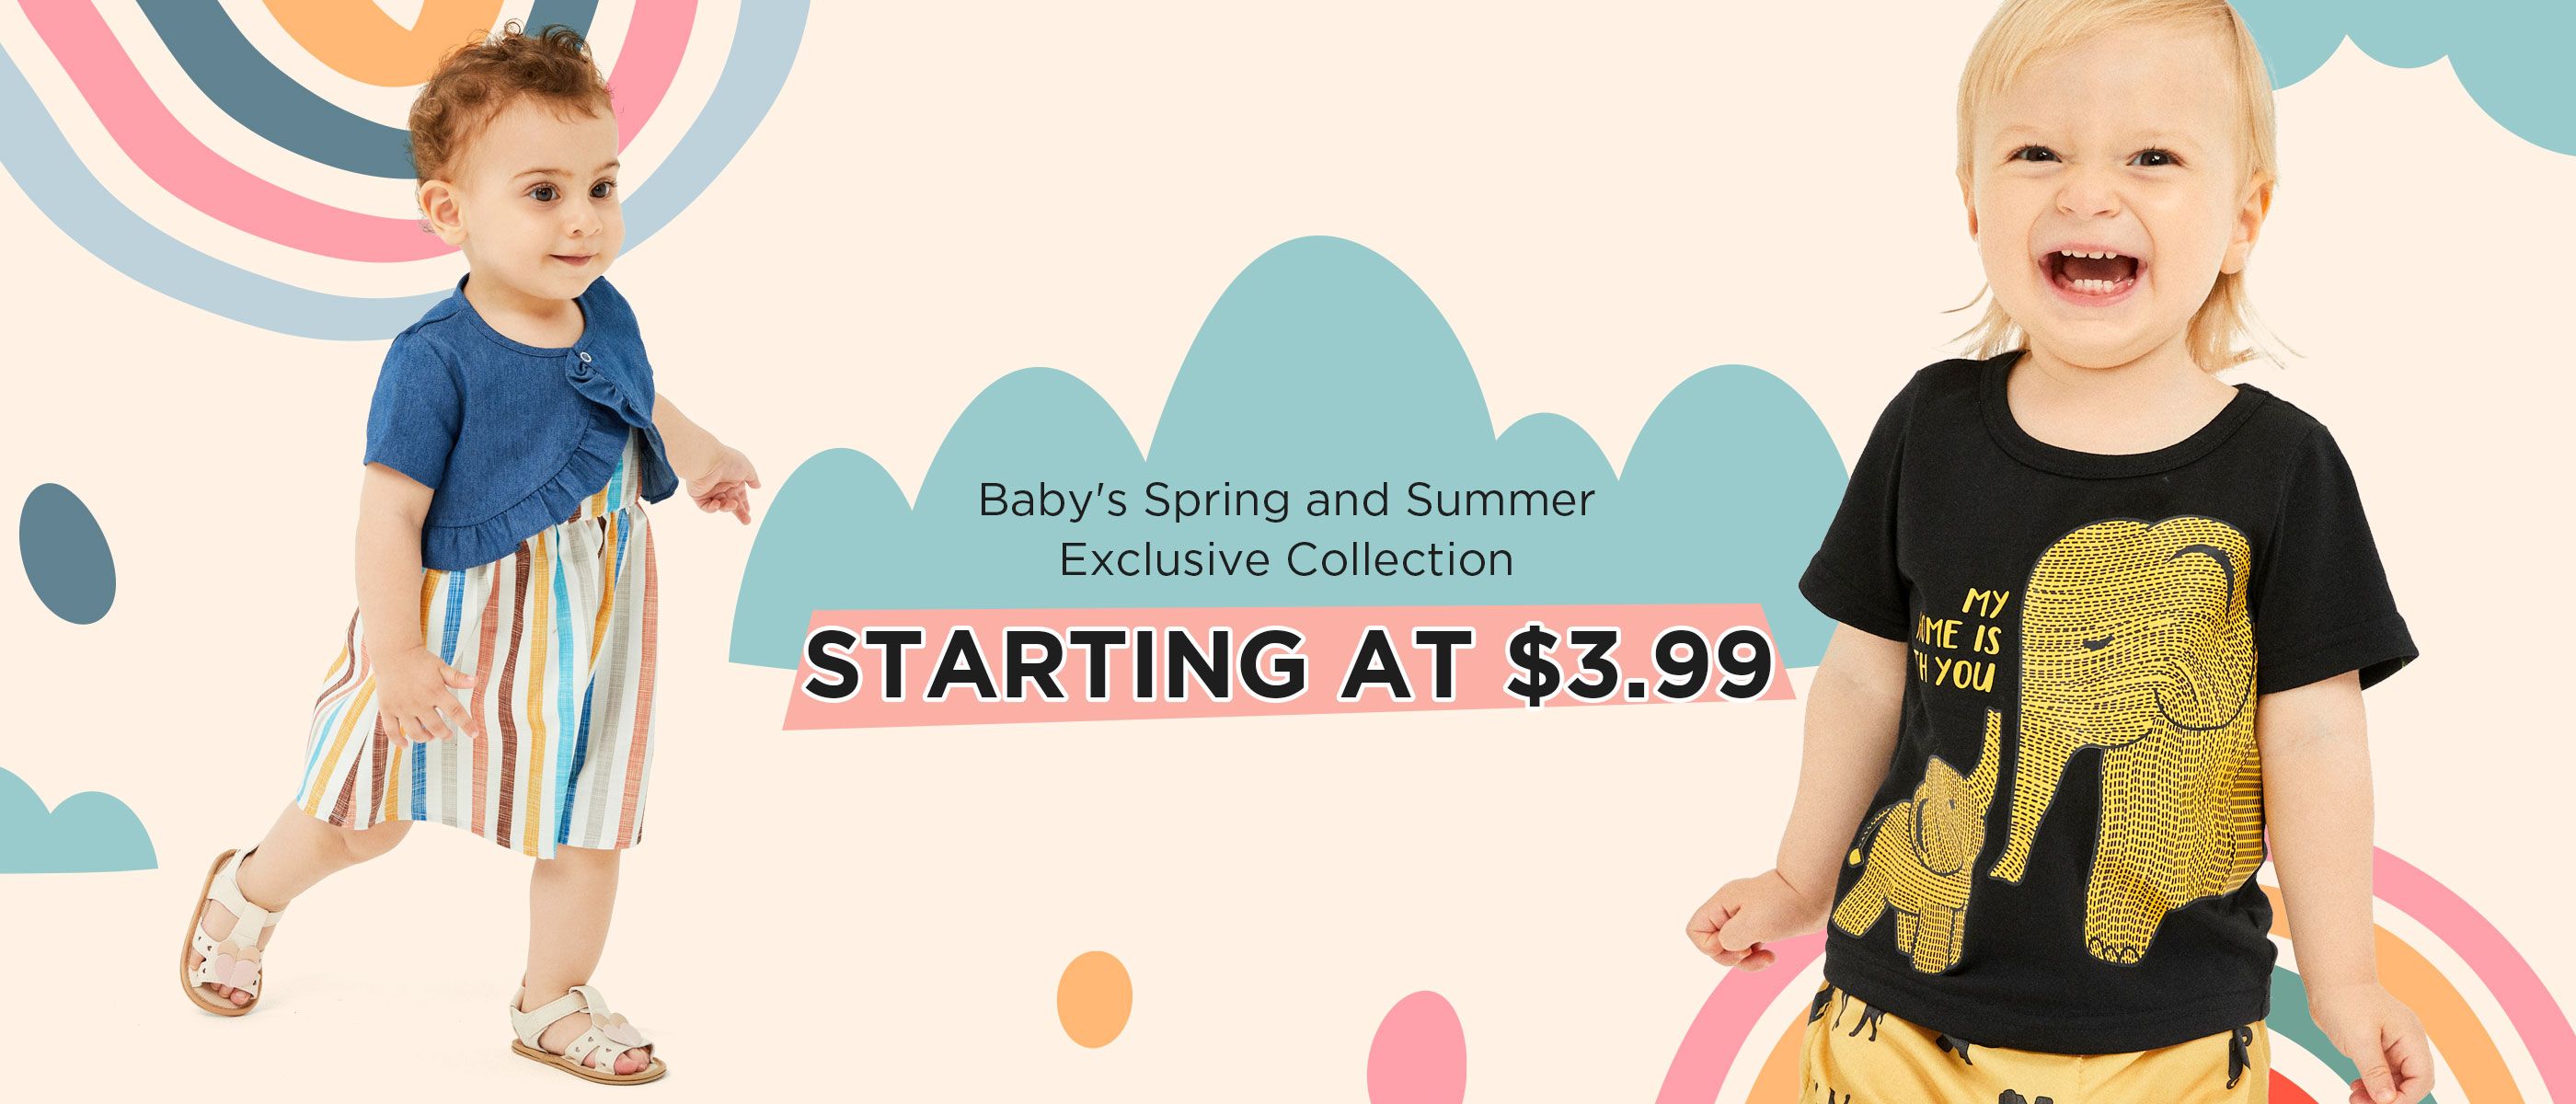 Baby's Spring and Summer Exclusive Collection